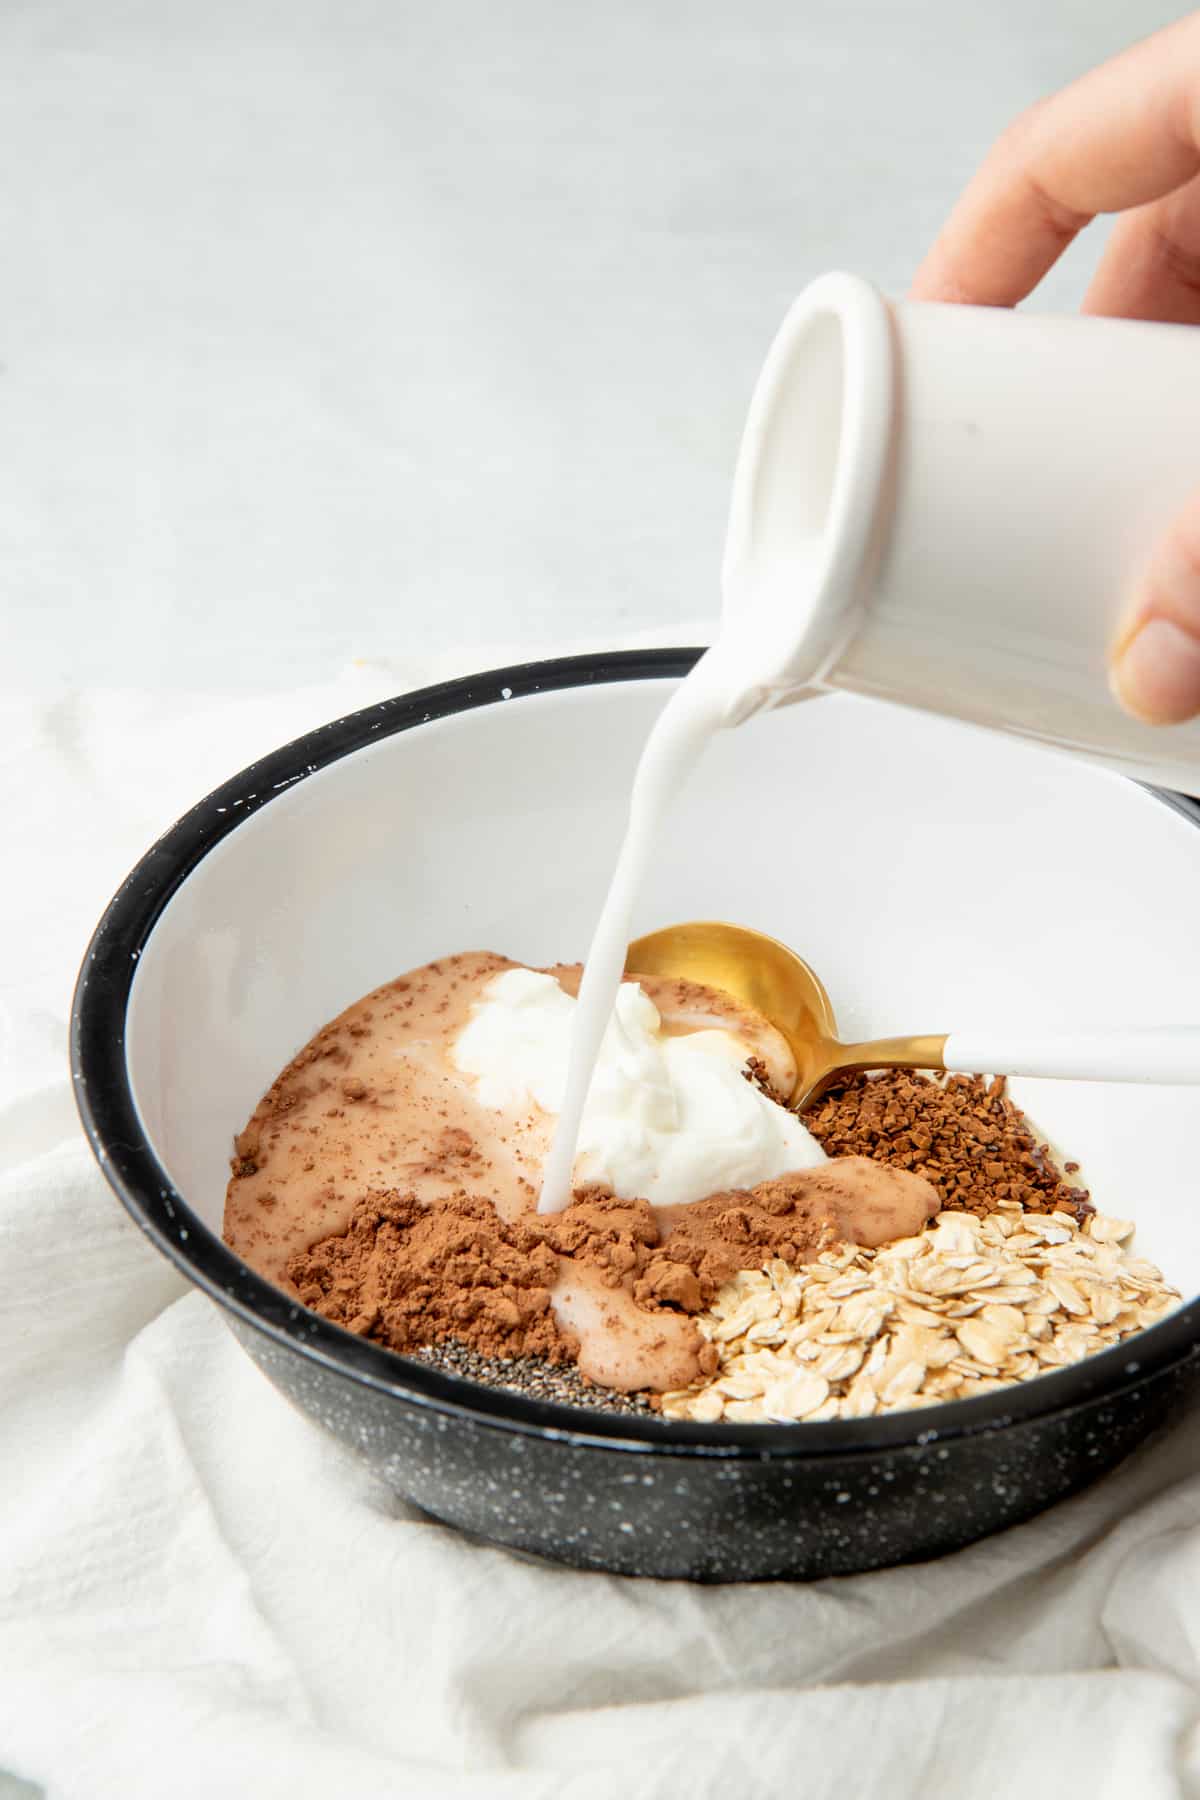 A hand pours milk into a bowl. Bowl holds oats, cocoa powder, Greek yogurt, and other ingredients.